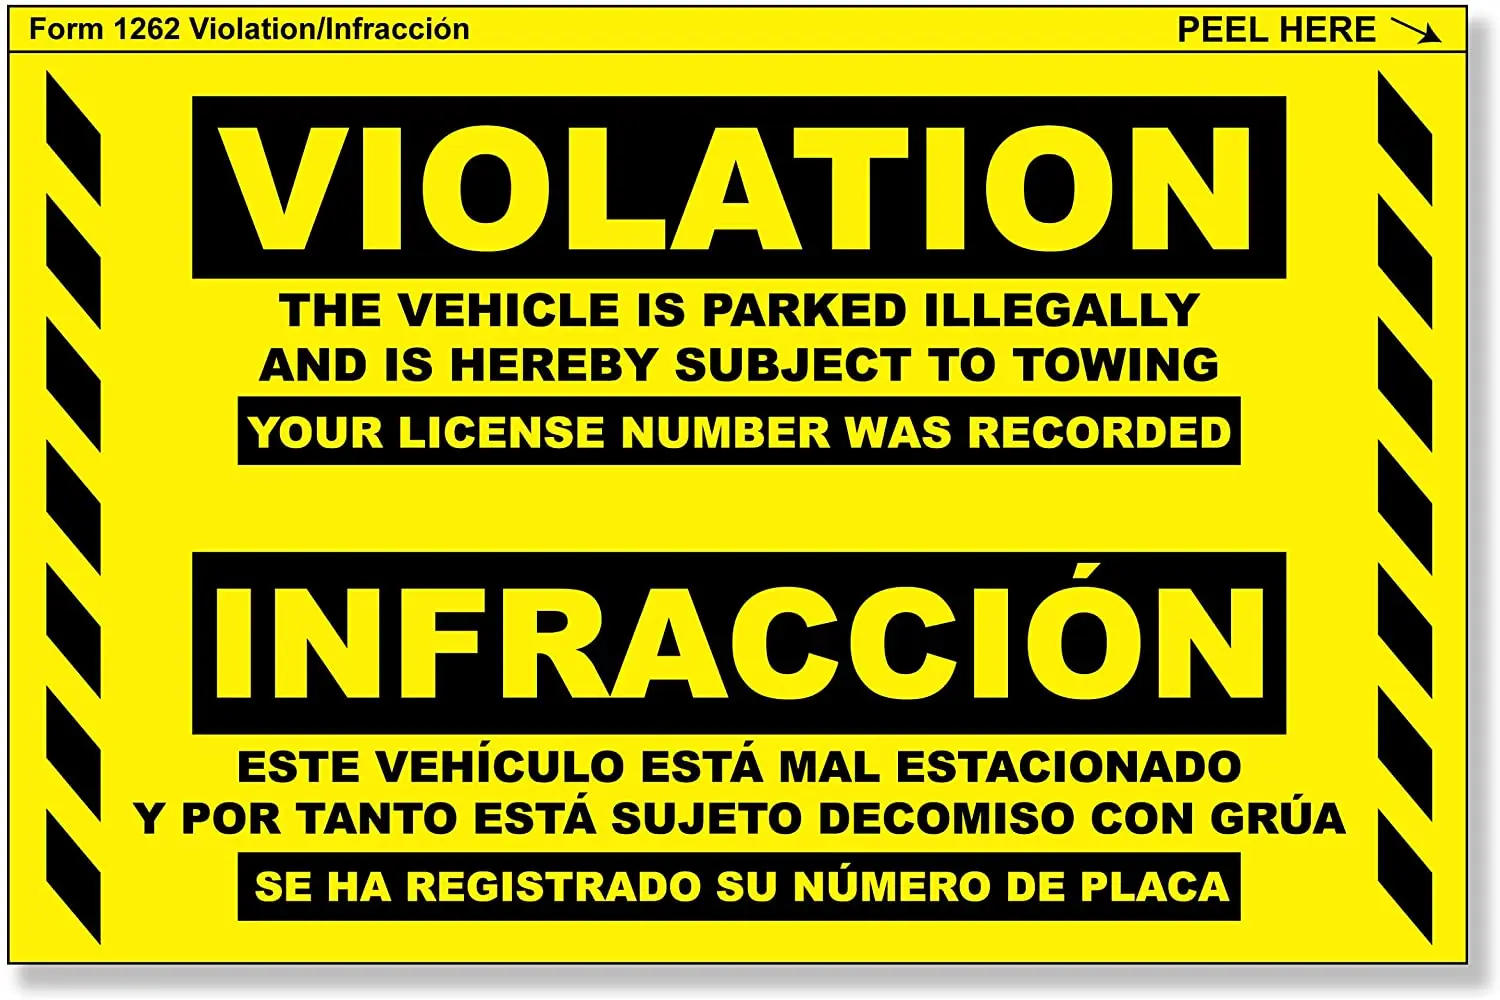 

Parking Violation Stickers Hard To Remove (Yellow) Bilingual Towing Messages for Warning Cars Bodywork Windshield Suv Decoration